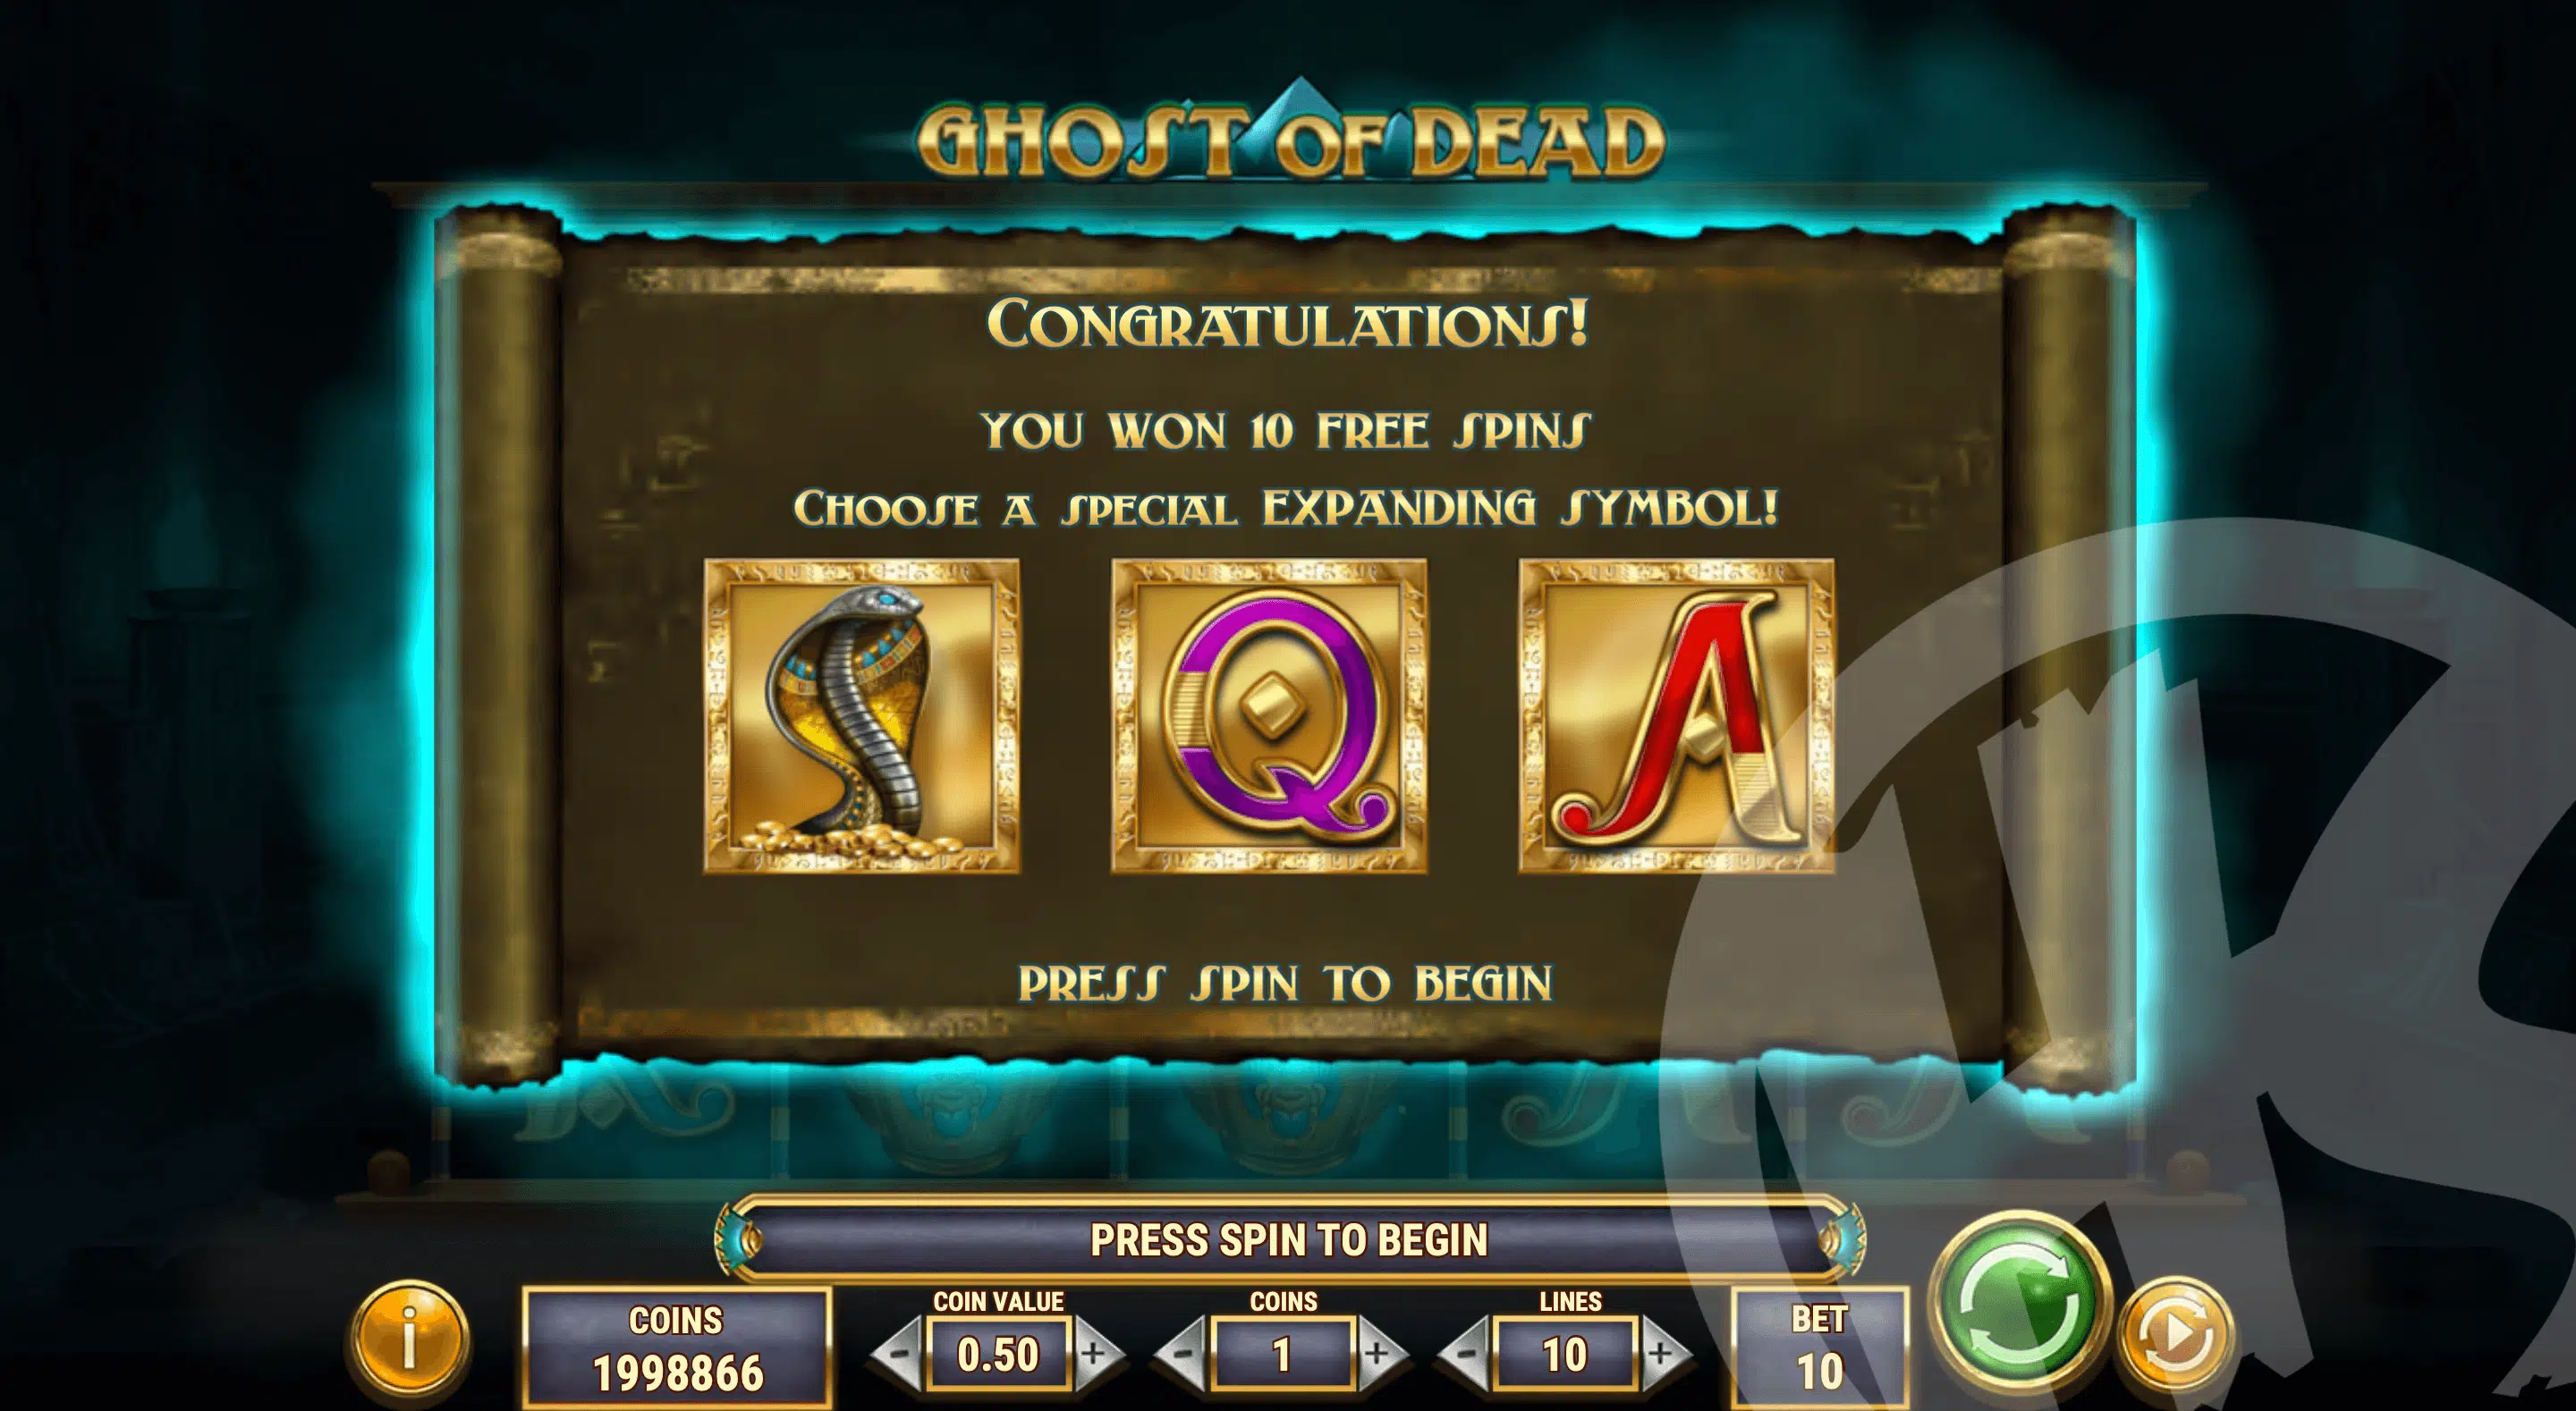 Players Get a Choice of Symbol During Free Spins